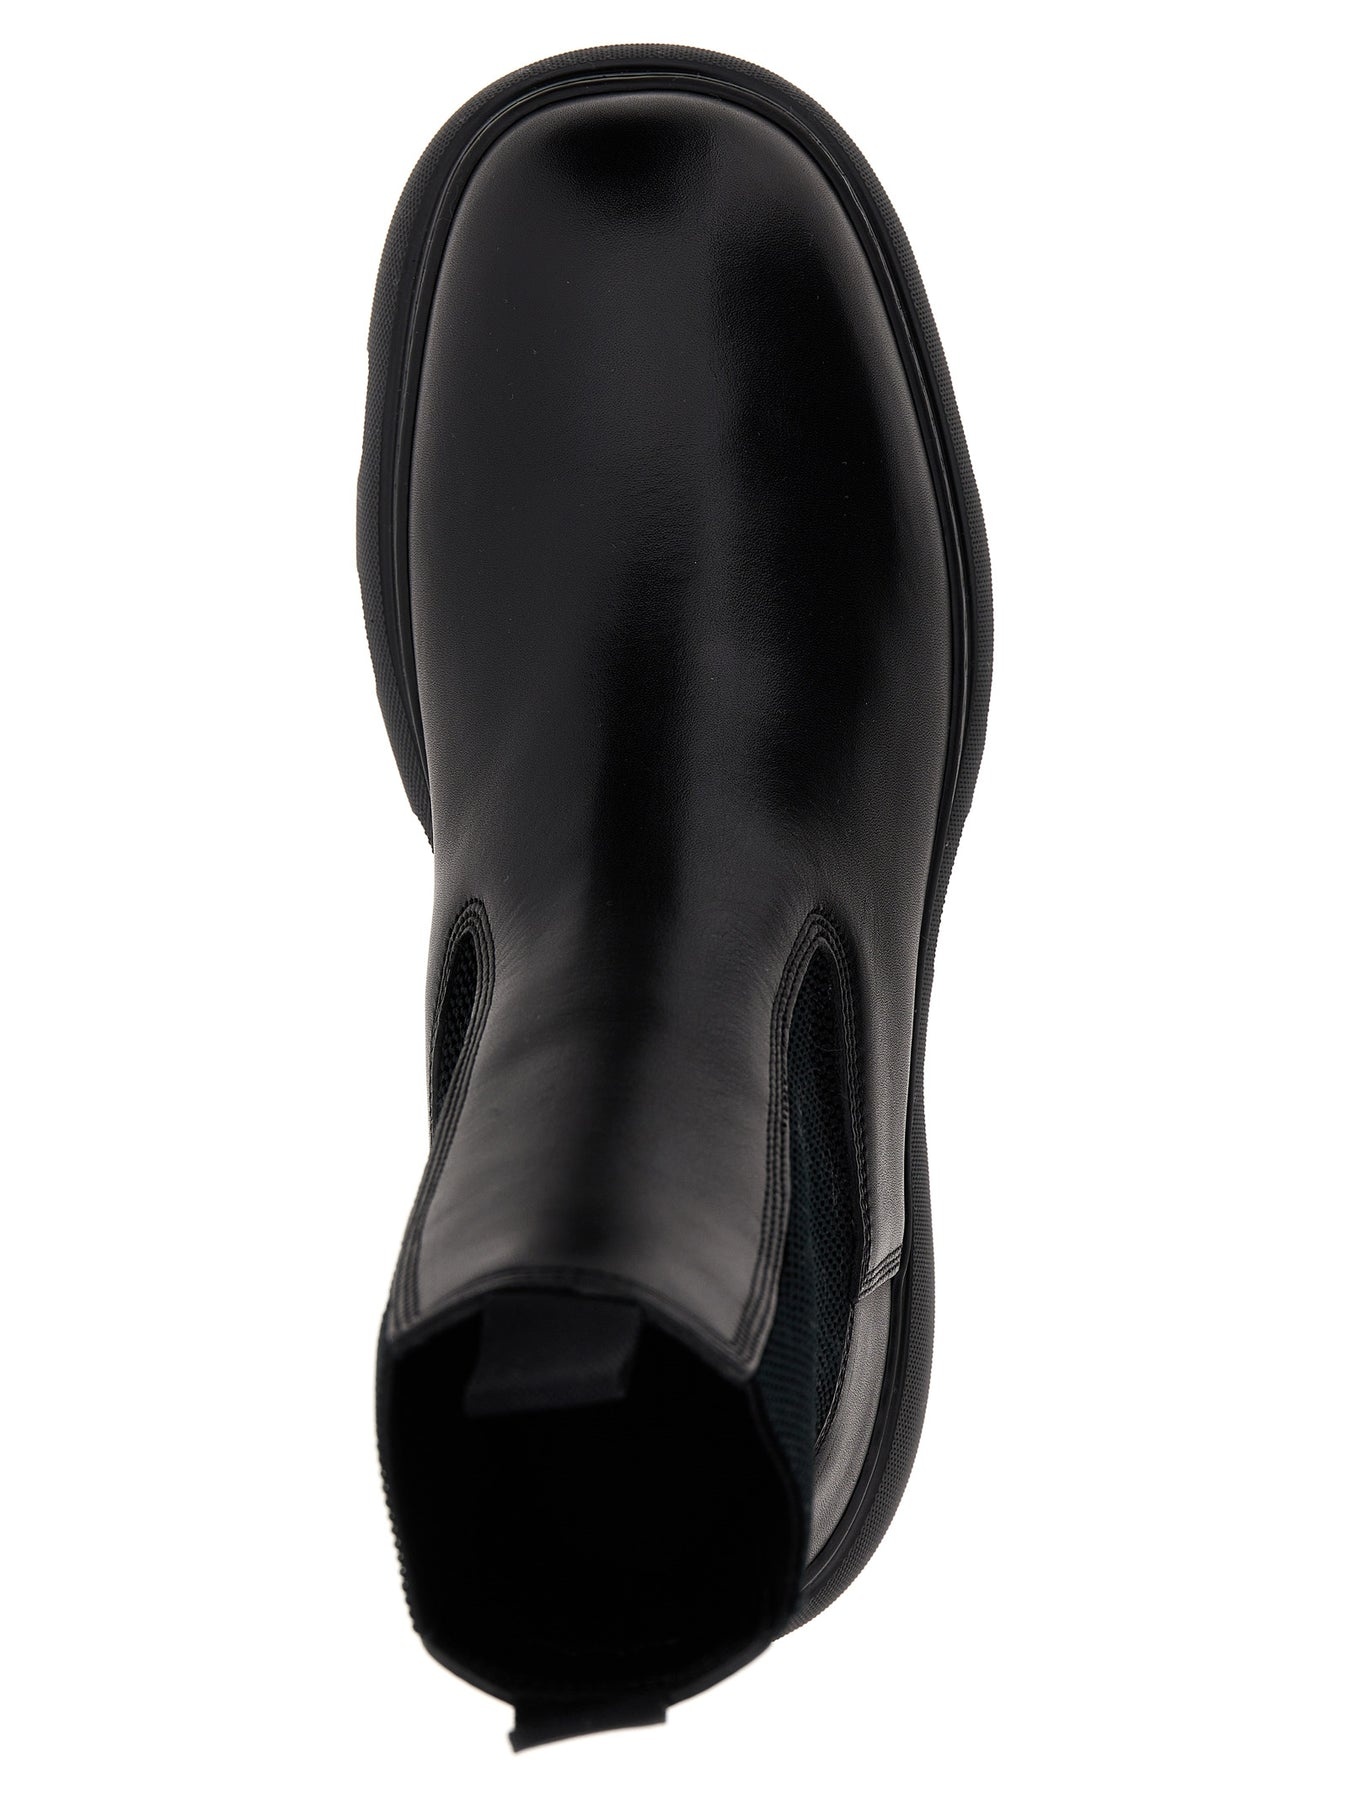 Chelsea Boots, Ankle Boots Black - 4